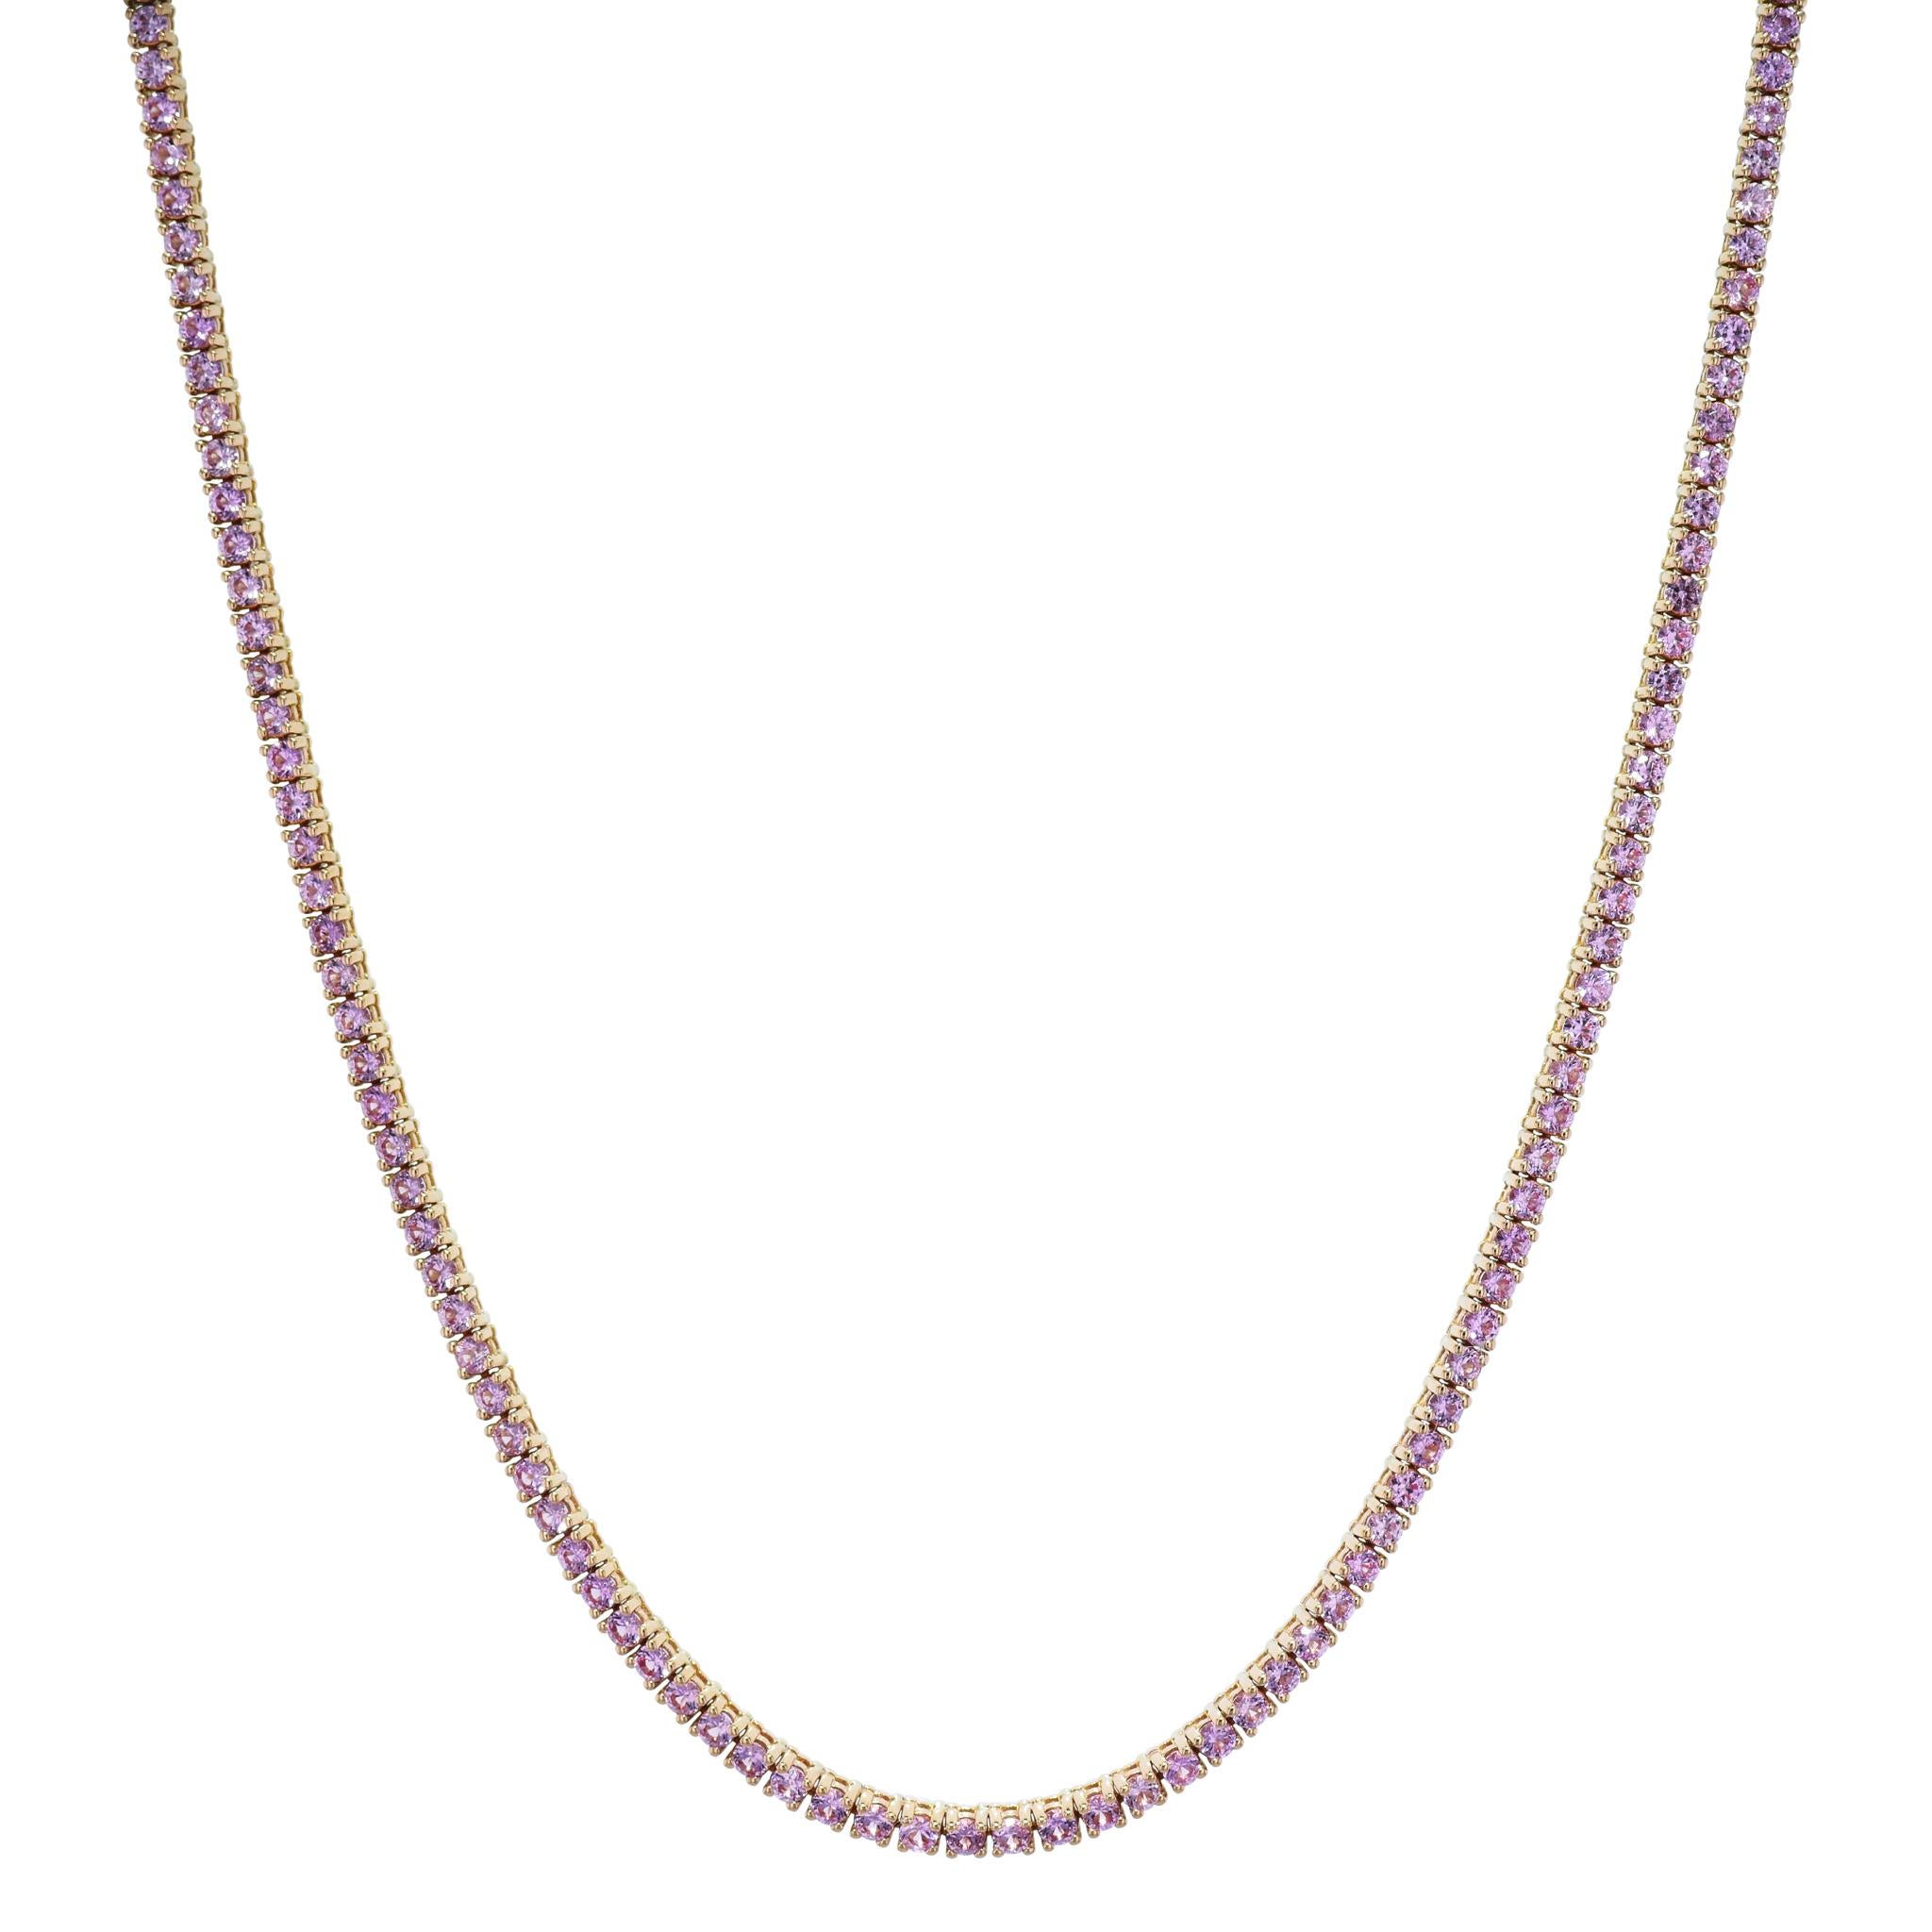 Brilliant Cut Handmade 7.58 Carat Pink Sapphire Tennis Necklace Rose Gold  For Sale